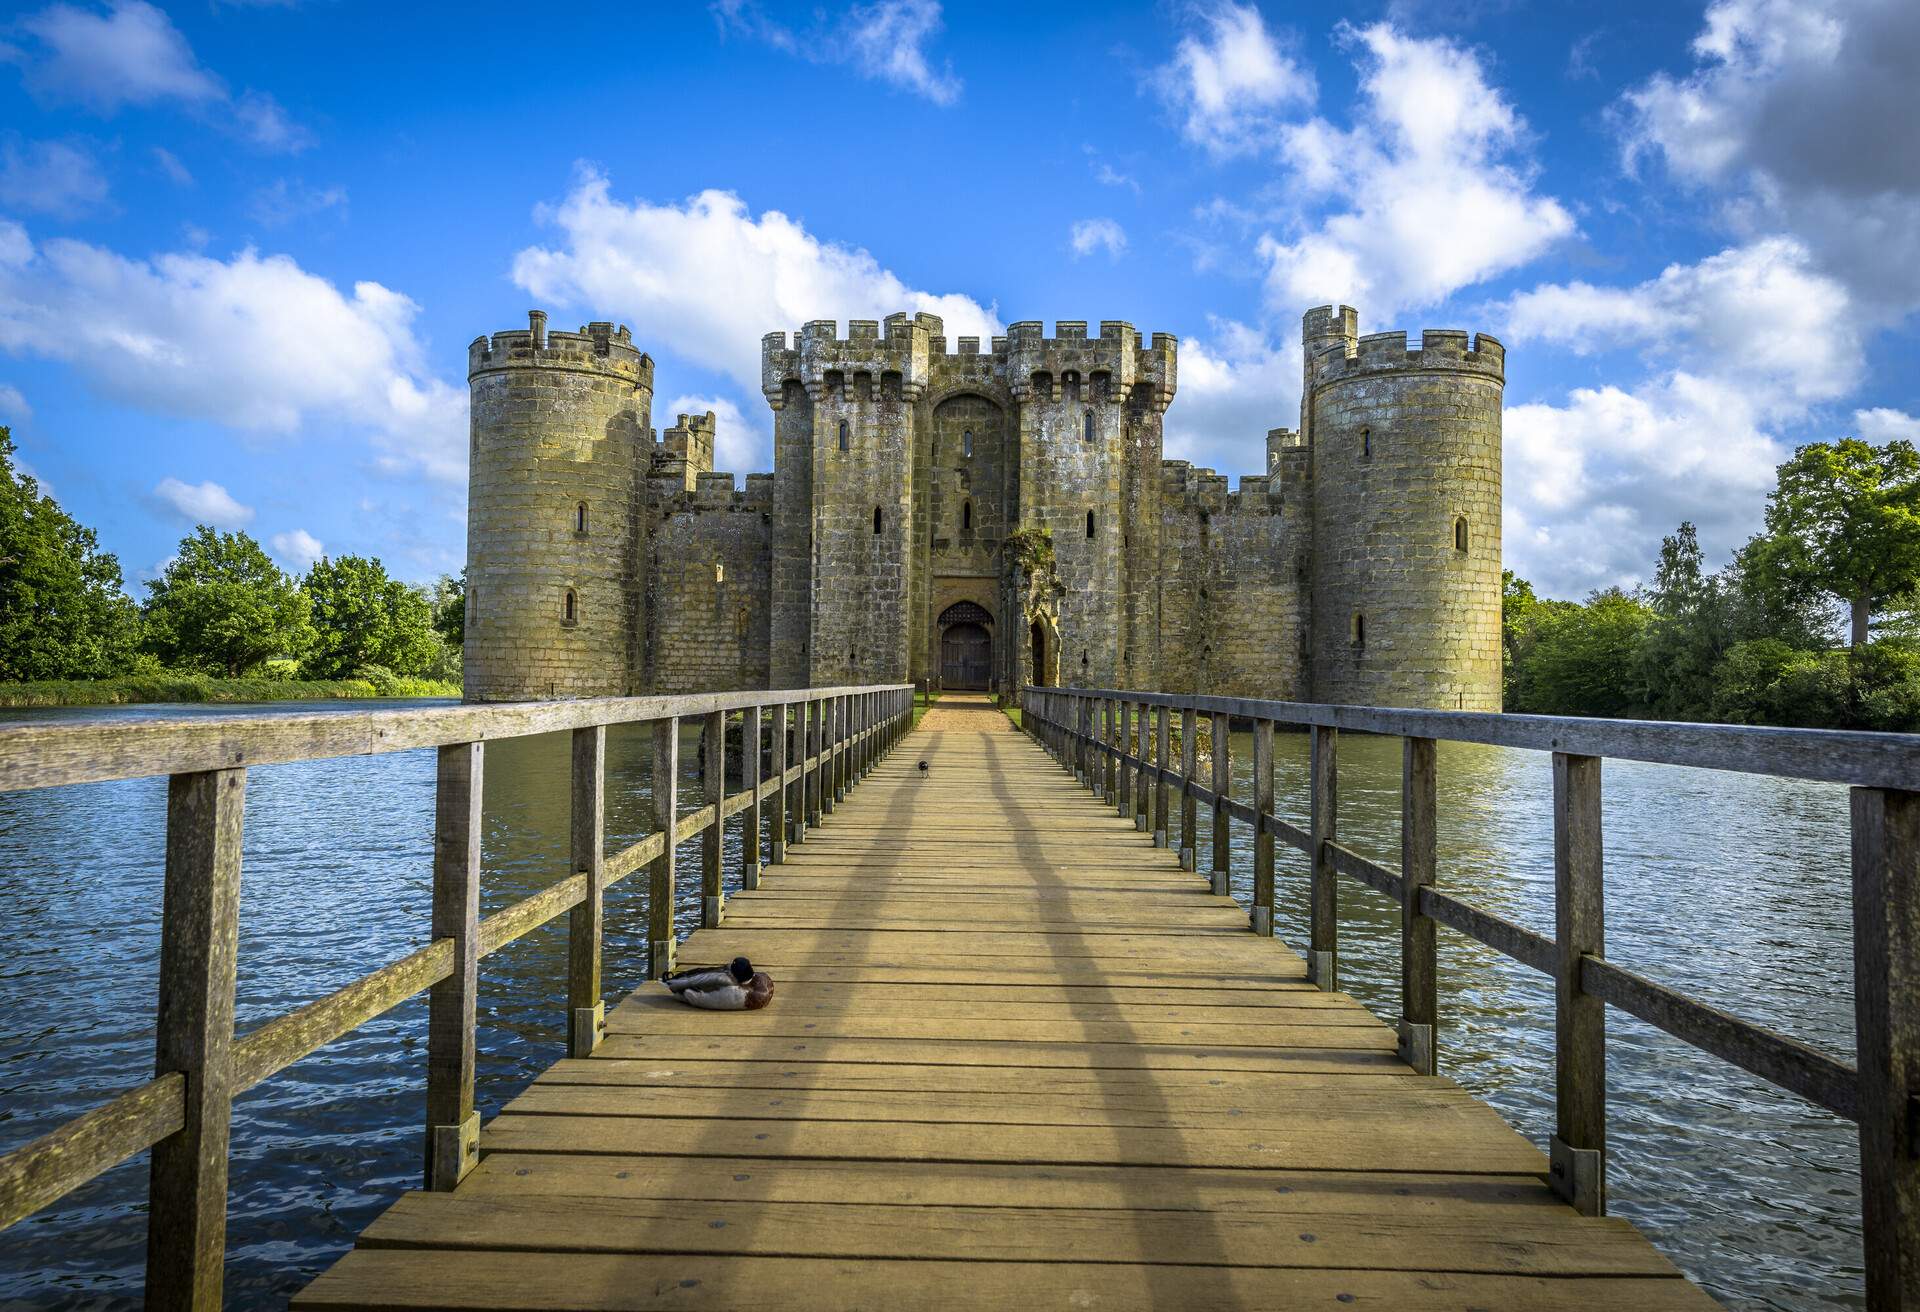 Historic Bodiam Castle and moat in East Sussex, England; Shutterstock ID 213121852; Purpose: CITY; Brand (KAYAK, Momondo, Any): KAYAK